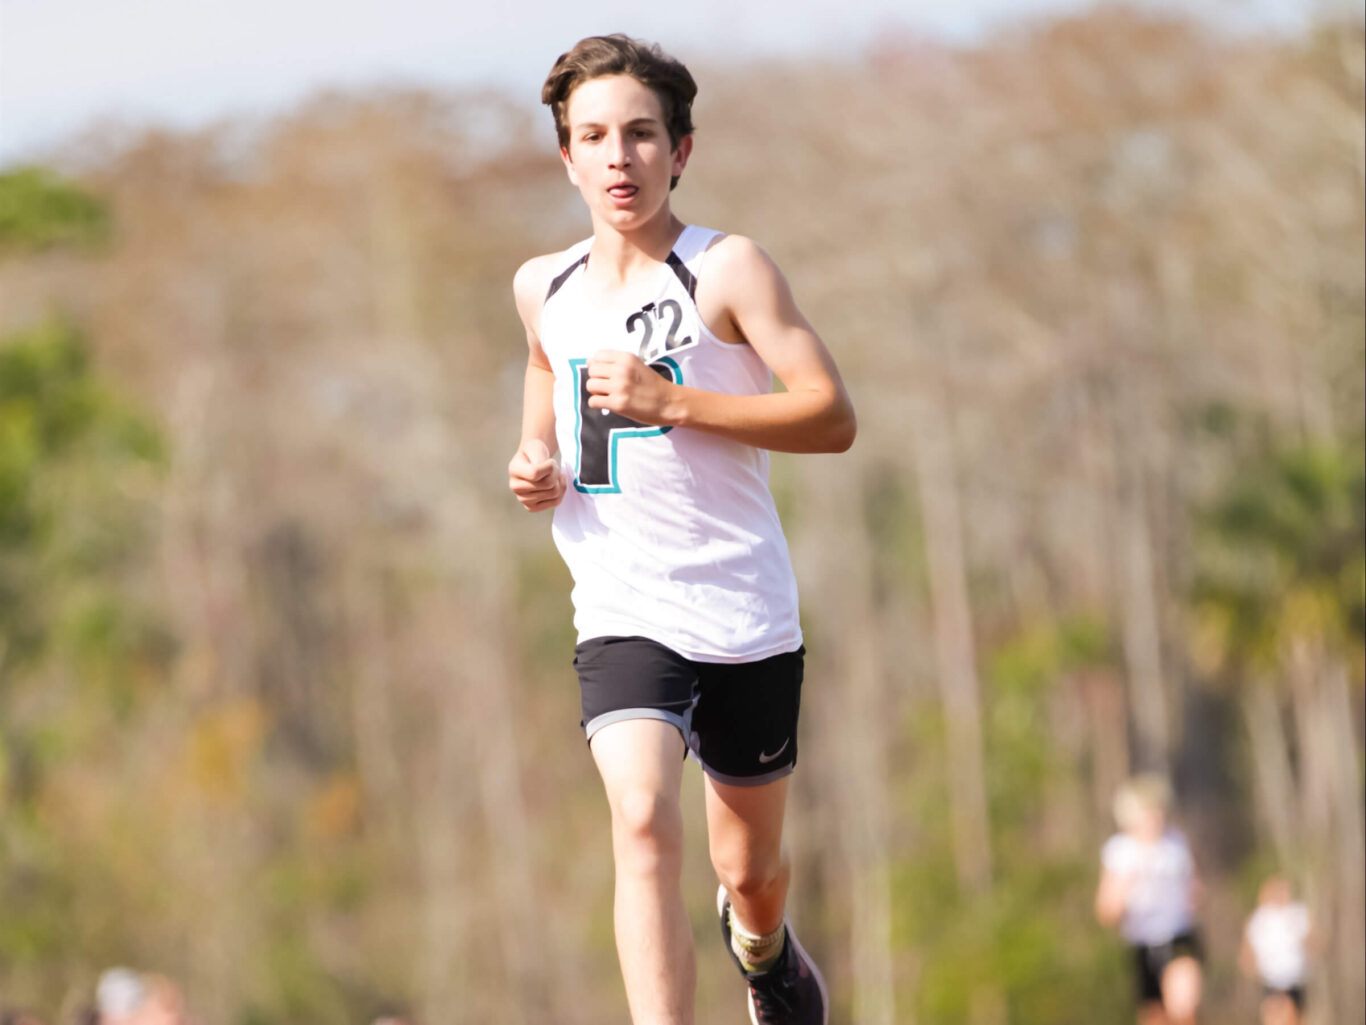 A young man running in a cross country race on a track.